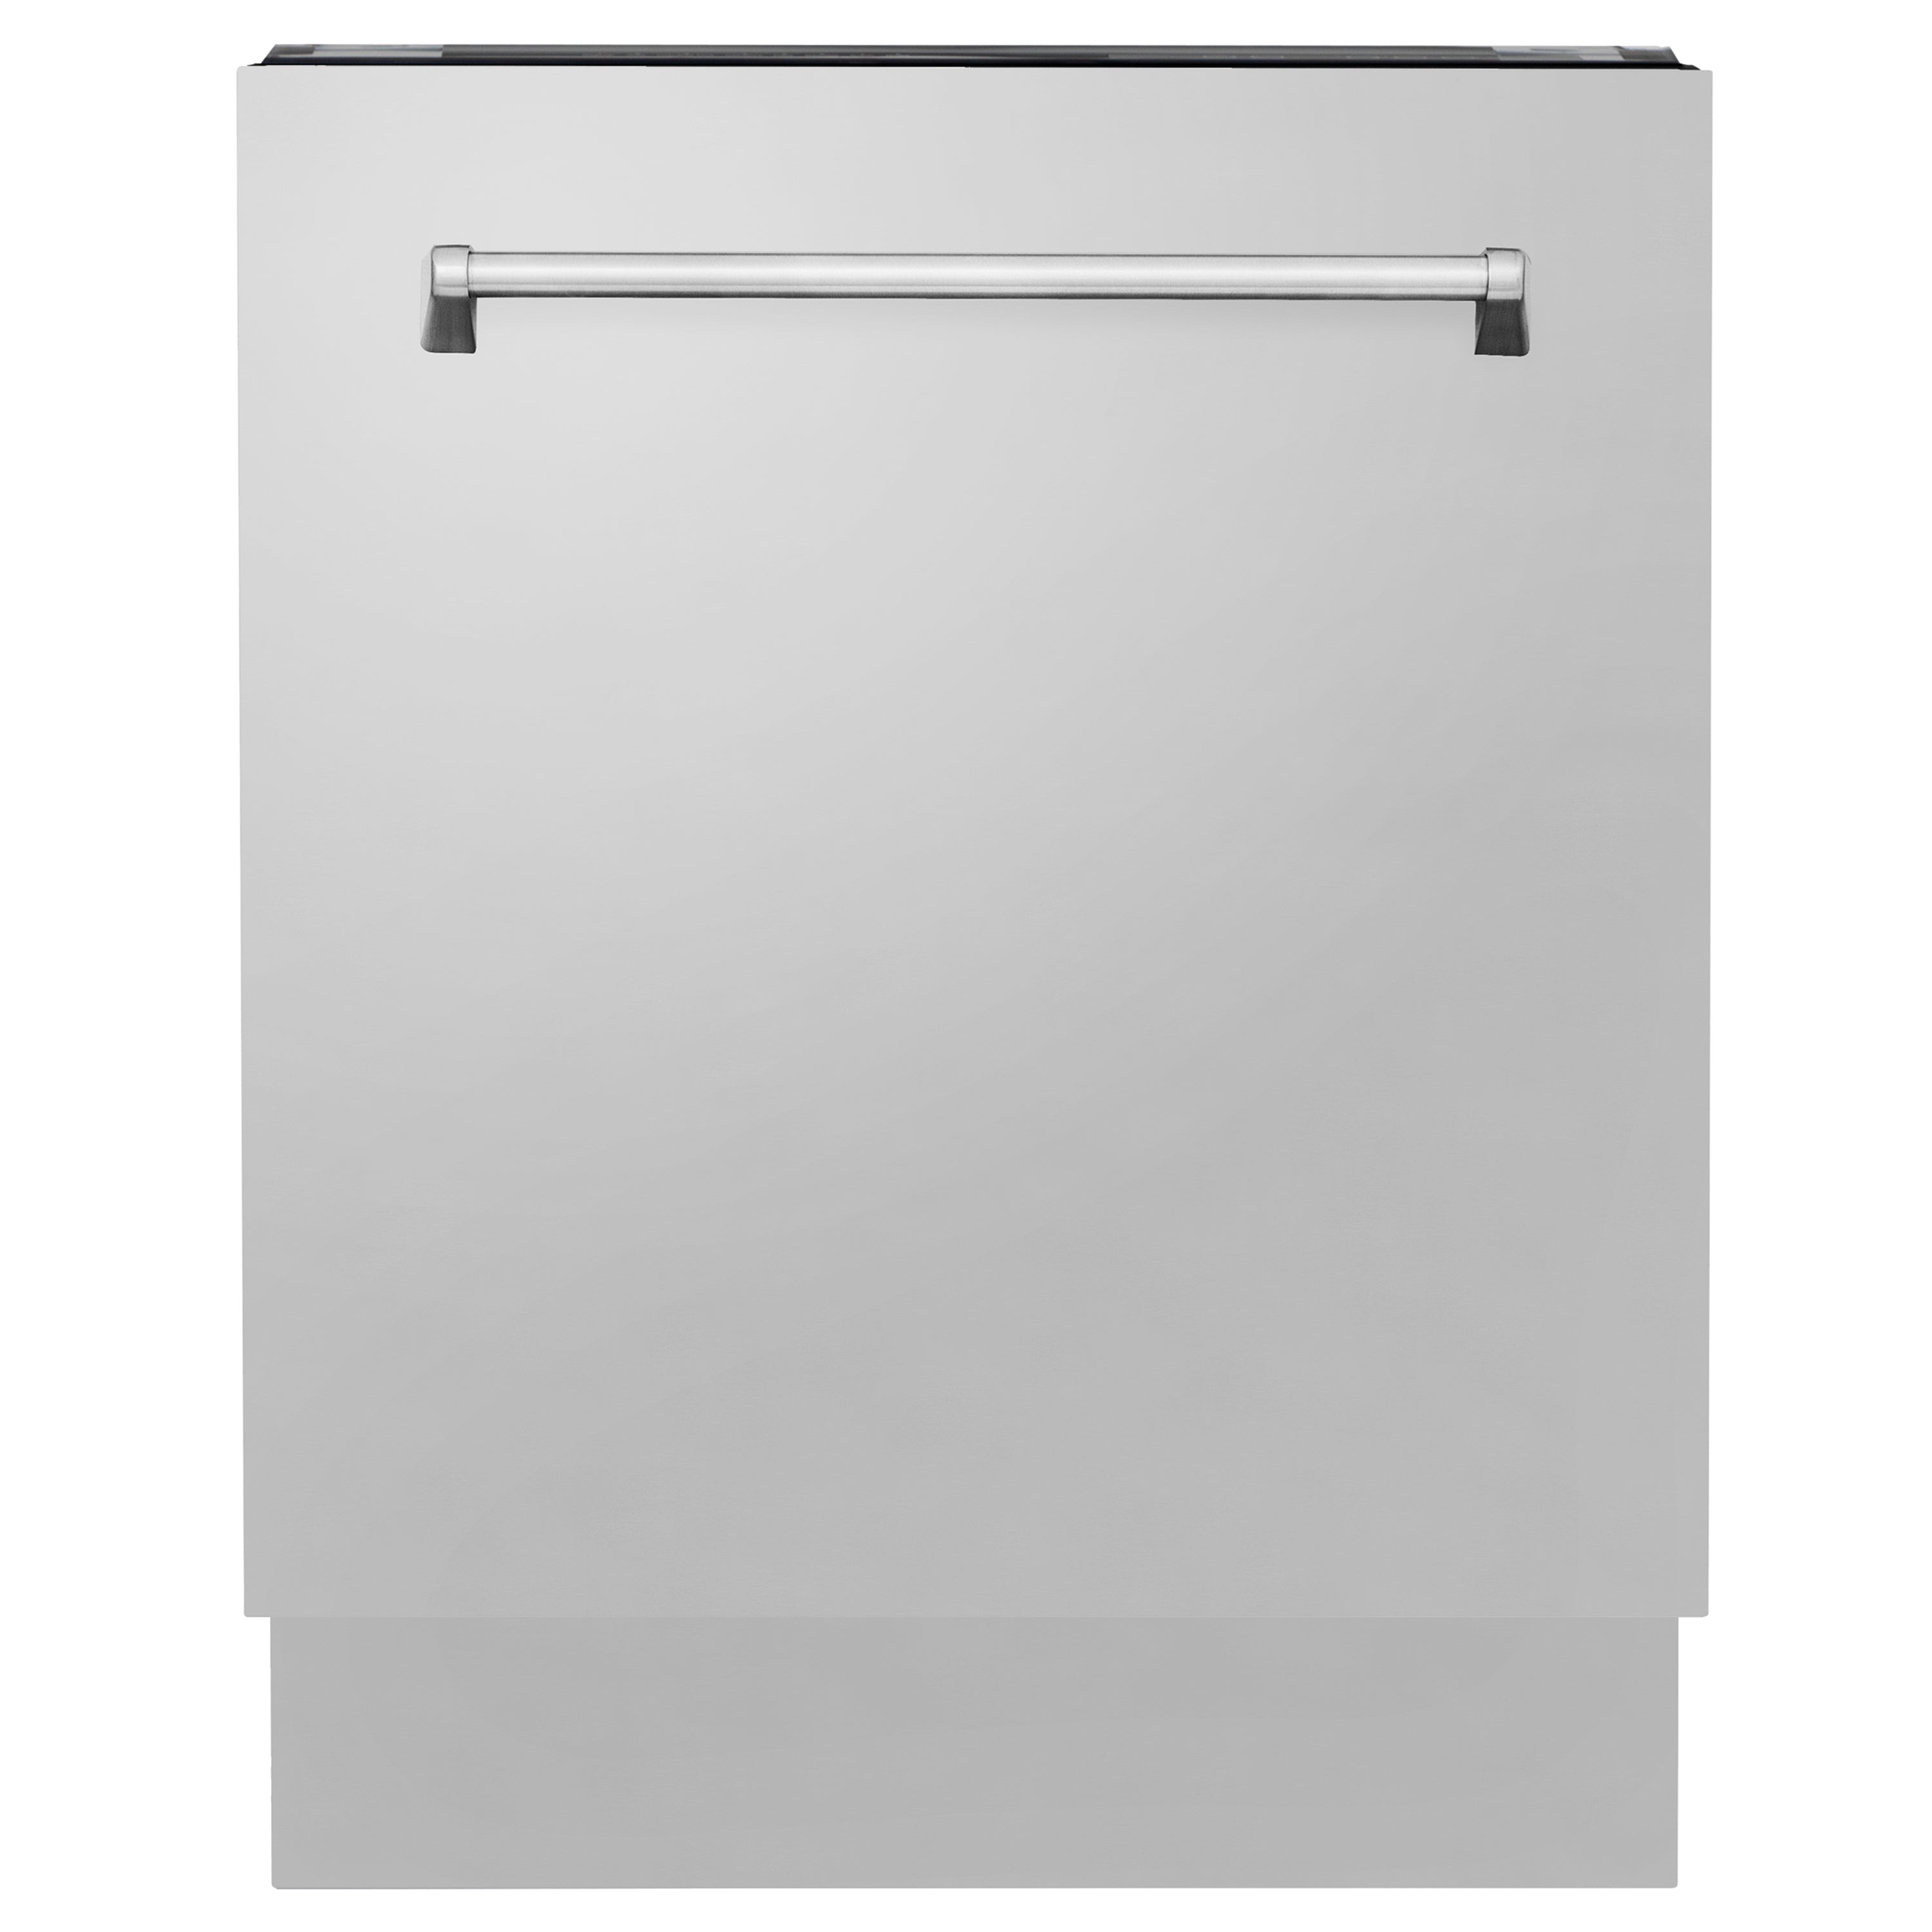 ZLINE 30" Kitchen Package with Stainless Steel Dual Fuel Range, Range Hood, Microwave Drawer and Tall Tub Dishwasher - 4KP-RARH30-MWDWV